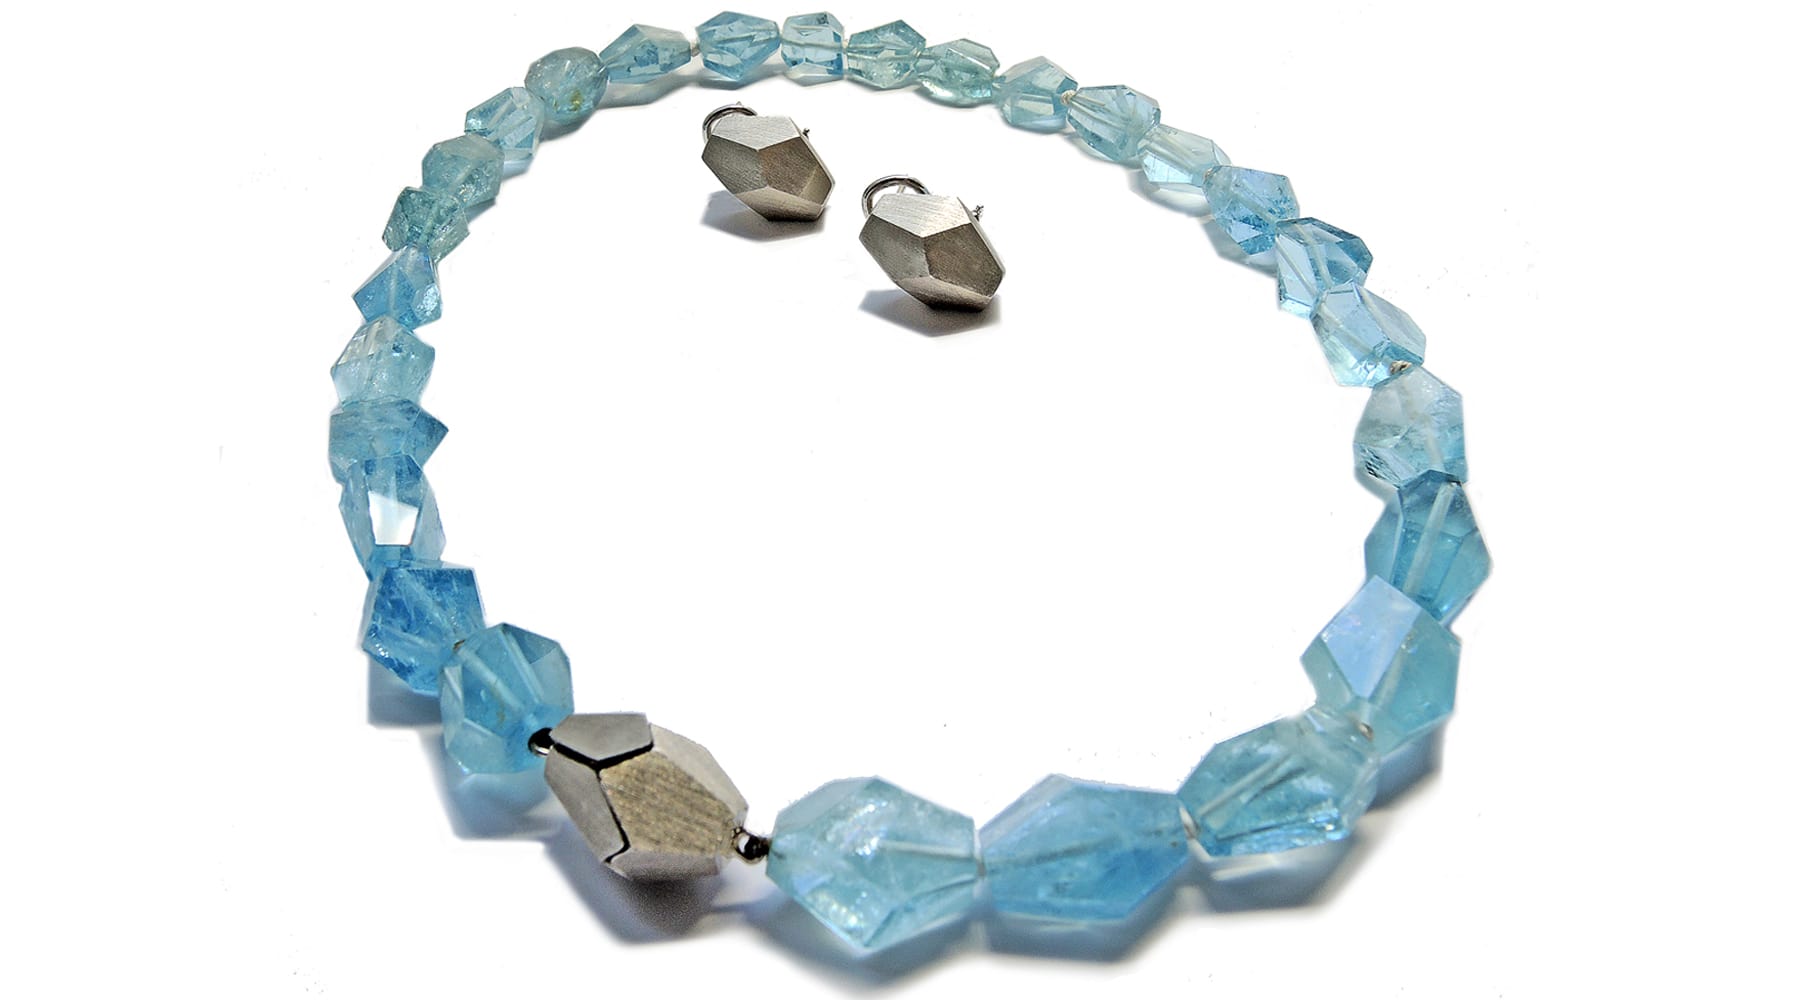 Large freeform bead aquamarine necklace with special 18k white gold clasp and matching earrings.